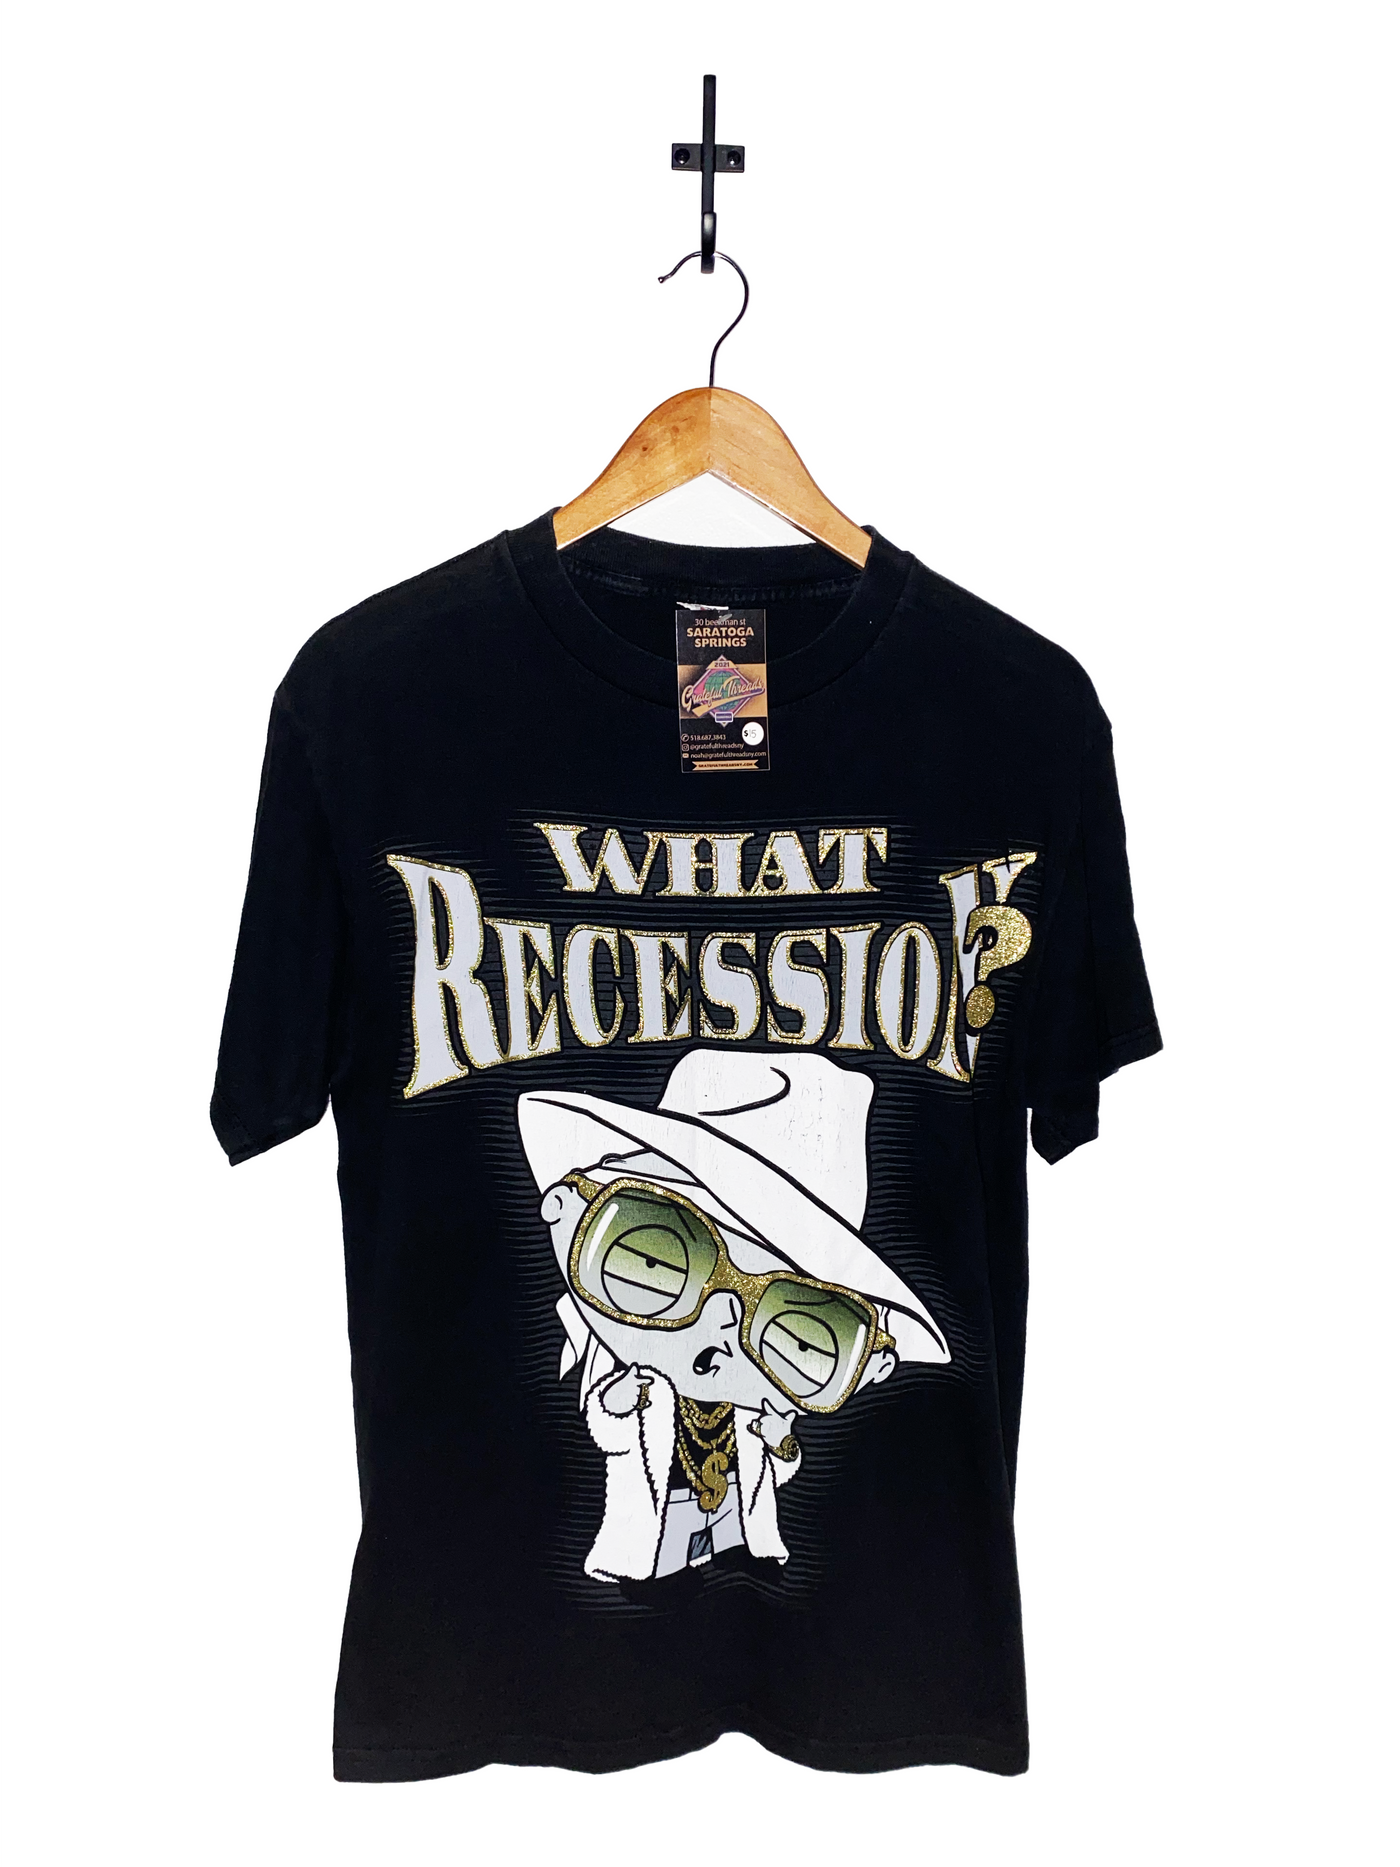 2009 Family Guy ‘What Recession’ Promo T-Shirt